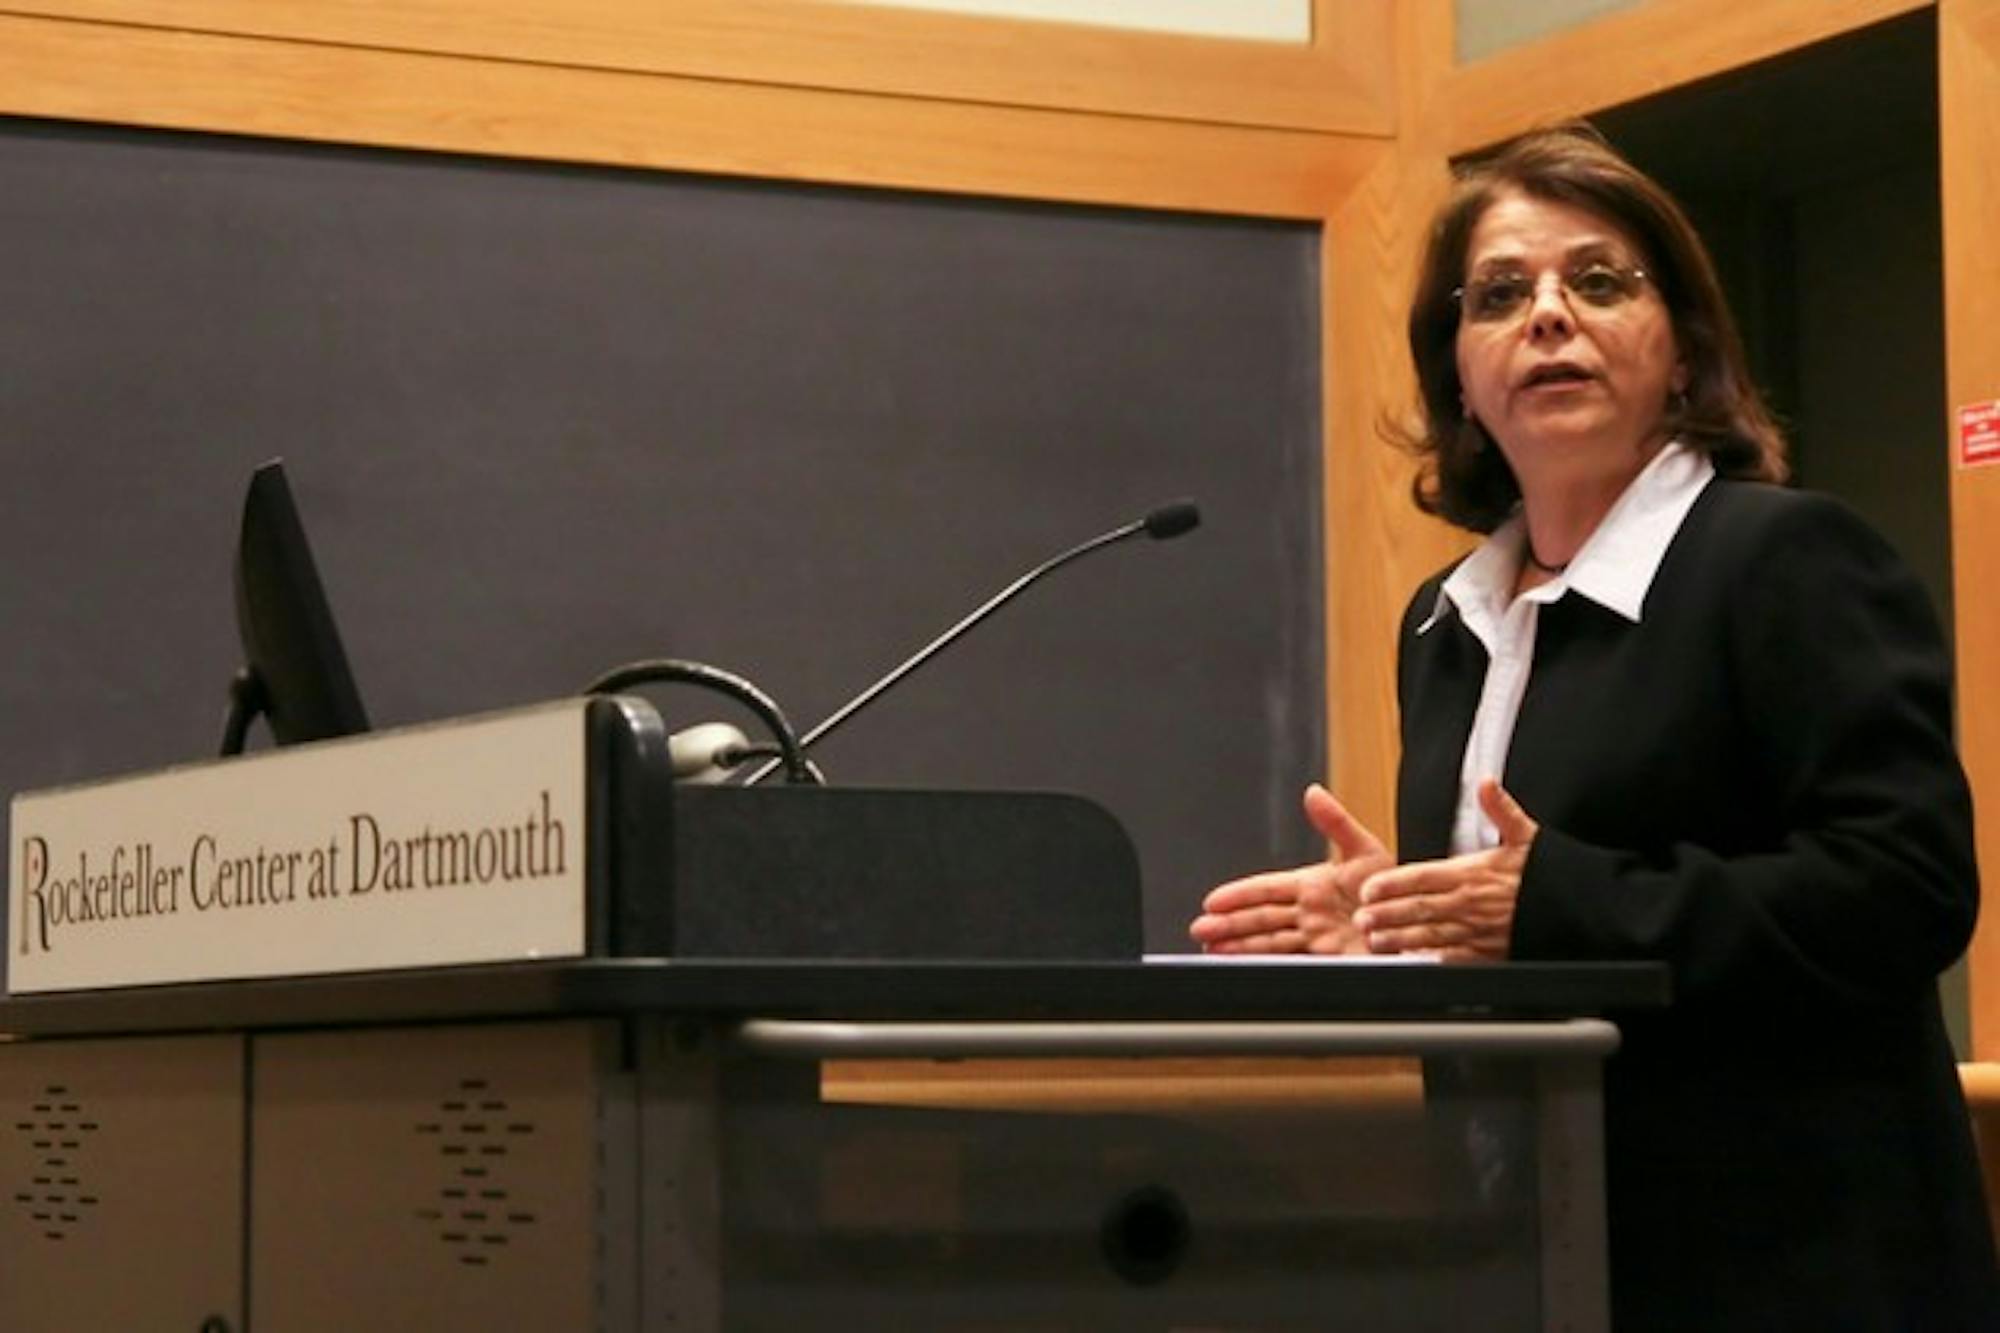 Associated Press correspondent Scheherezade Faramarzi discussed the United States' relationship with the Middle East in her Tuesday lecture.